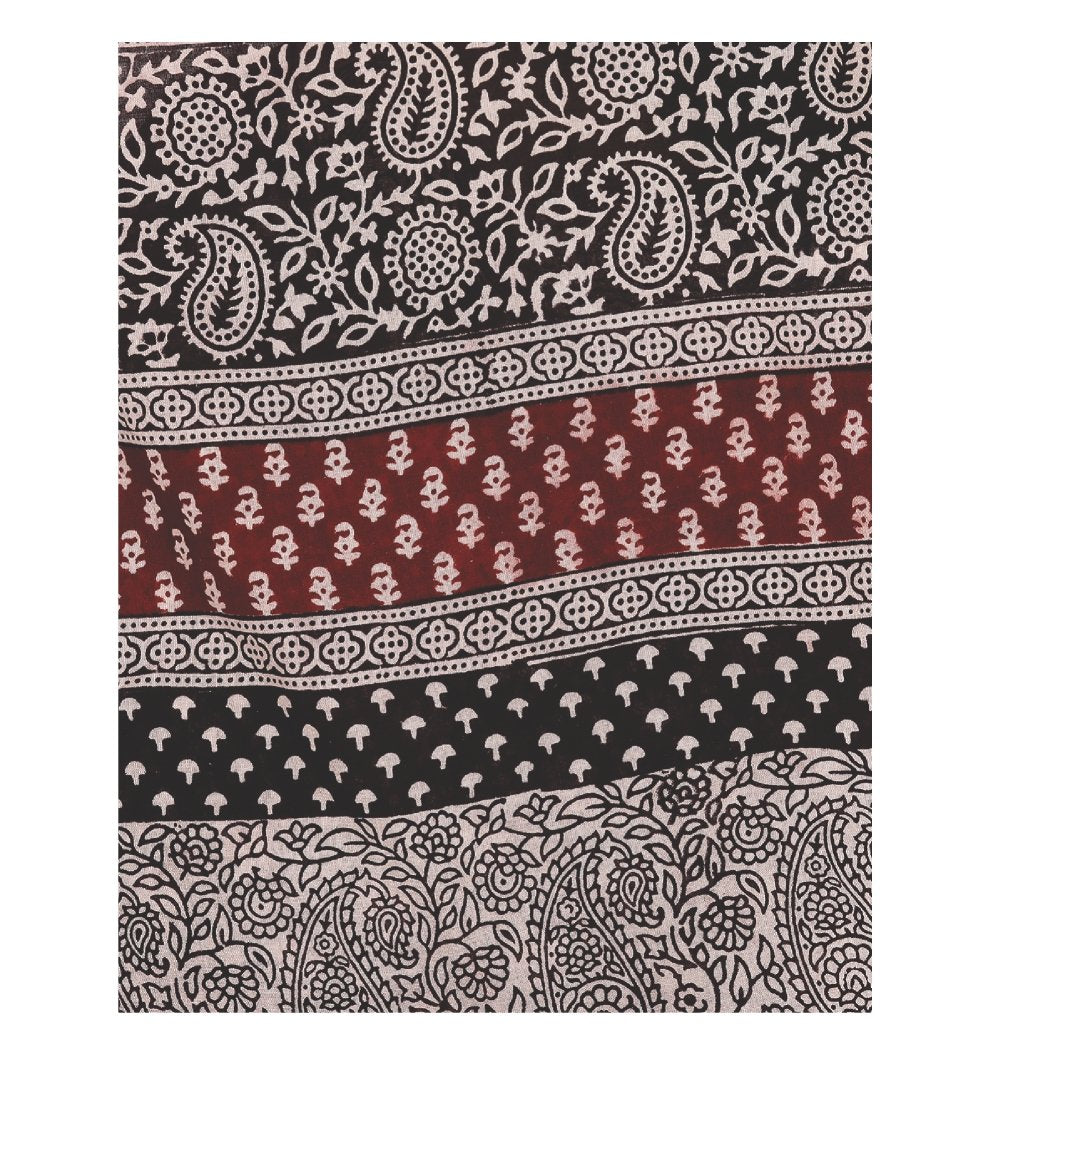 Maroon Cotton Handblock Bagh Print Handcrafted Saree-Saree-Kalakari India-ZIBASA0031-Bagh, Cotton, Geographical Indication, Hand Blocks, Hand Crafted, Heritage Prints, Natural Dyes, Sarees, Sustainable Fabrics-[Linen,Ethnic,wear,Fashionista,Handloom,Handicraft,Indigo,blockprint,block,print,Cotton,Chanderi,Blue, latest,classy,party,bollywood,trendy,summer,style,traditional,formal,elegant,unique,style,hand,block,print, dabu,booti,gift,present,glamorous,affordable,collectible,Sari,Saree,printed, ho